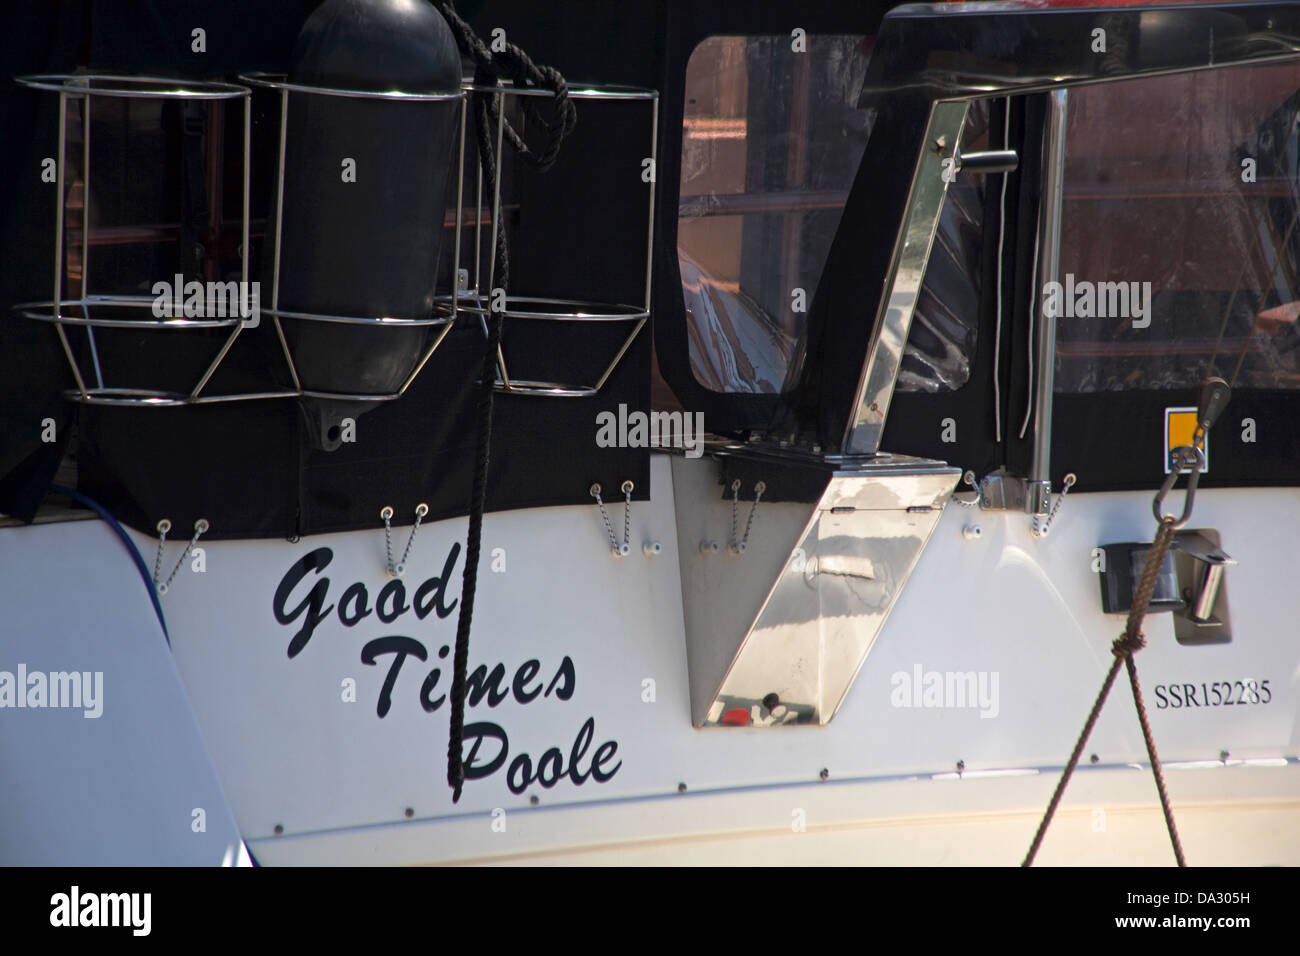 Good Times Poole - boat moored at Poole Harbour in June Stock Photo